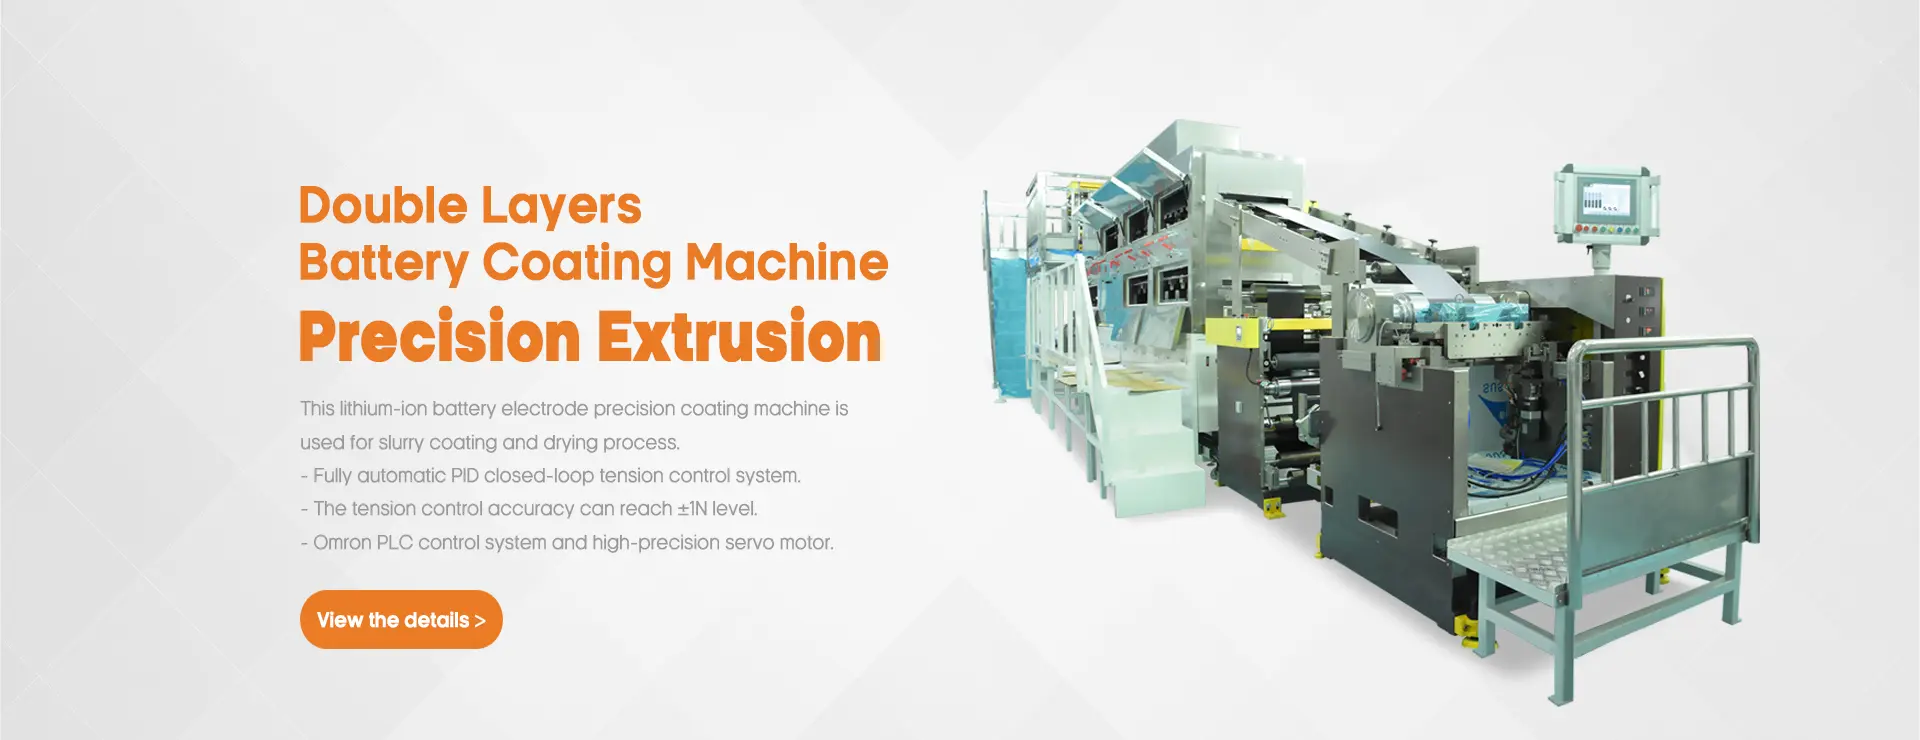 Double Layers Extrusion Coating Machine